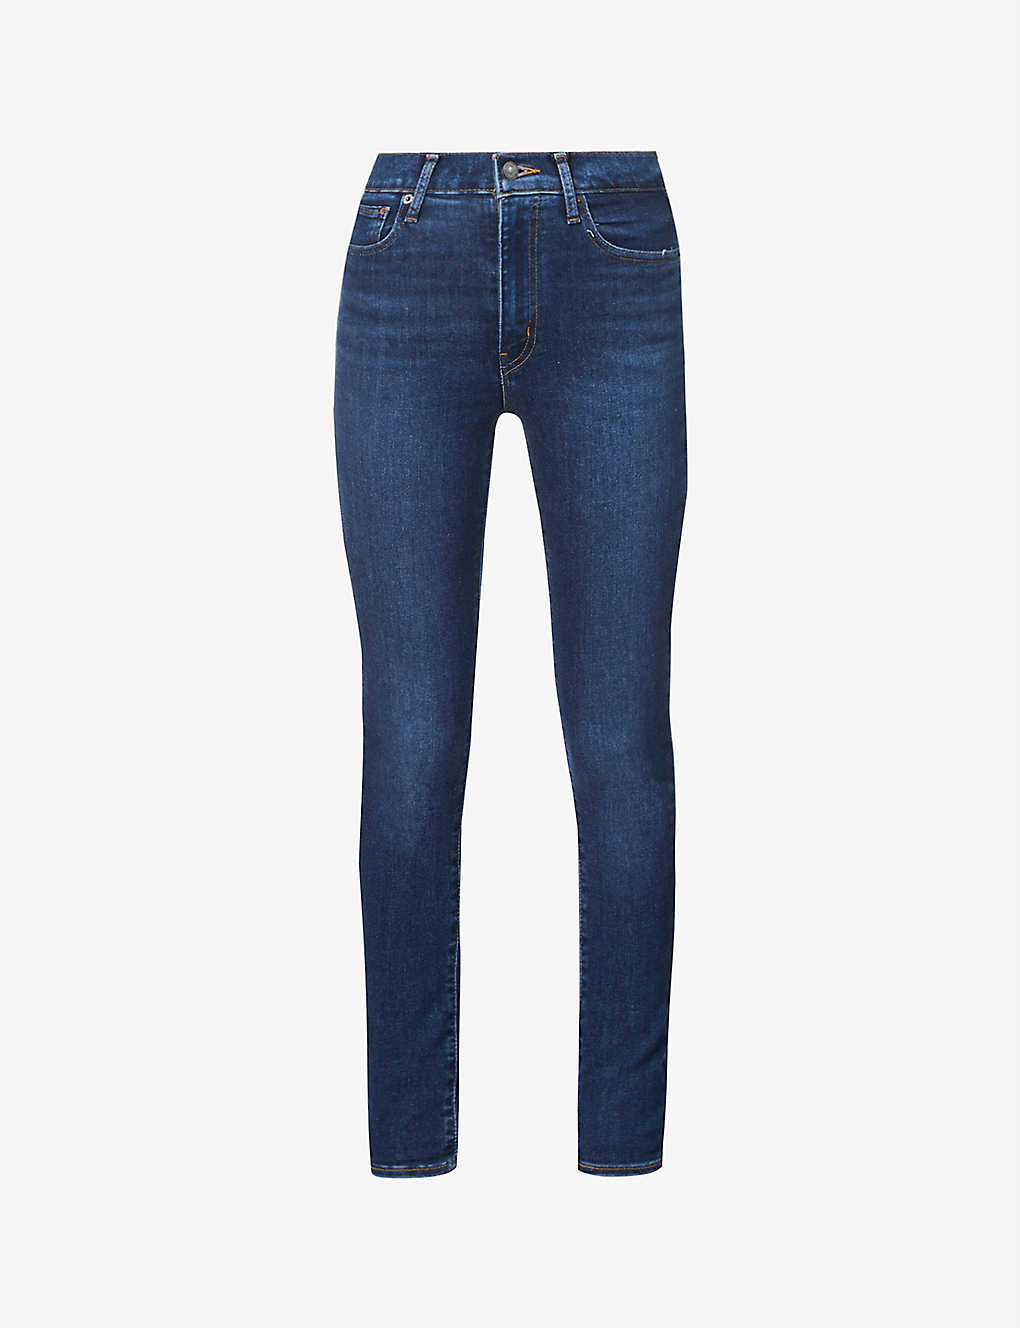 Mile High skinny high-rise jeans(9225597)